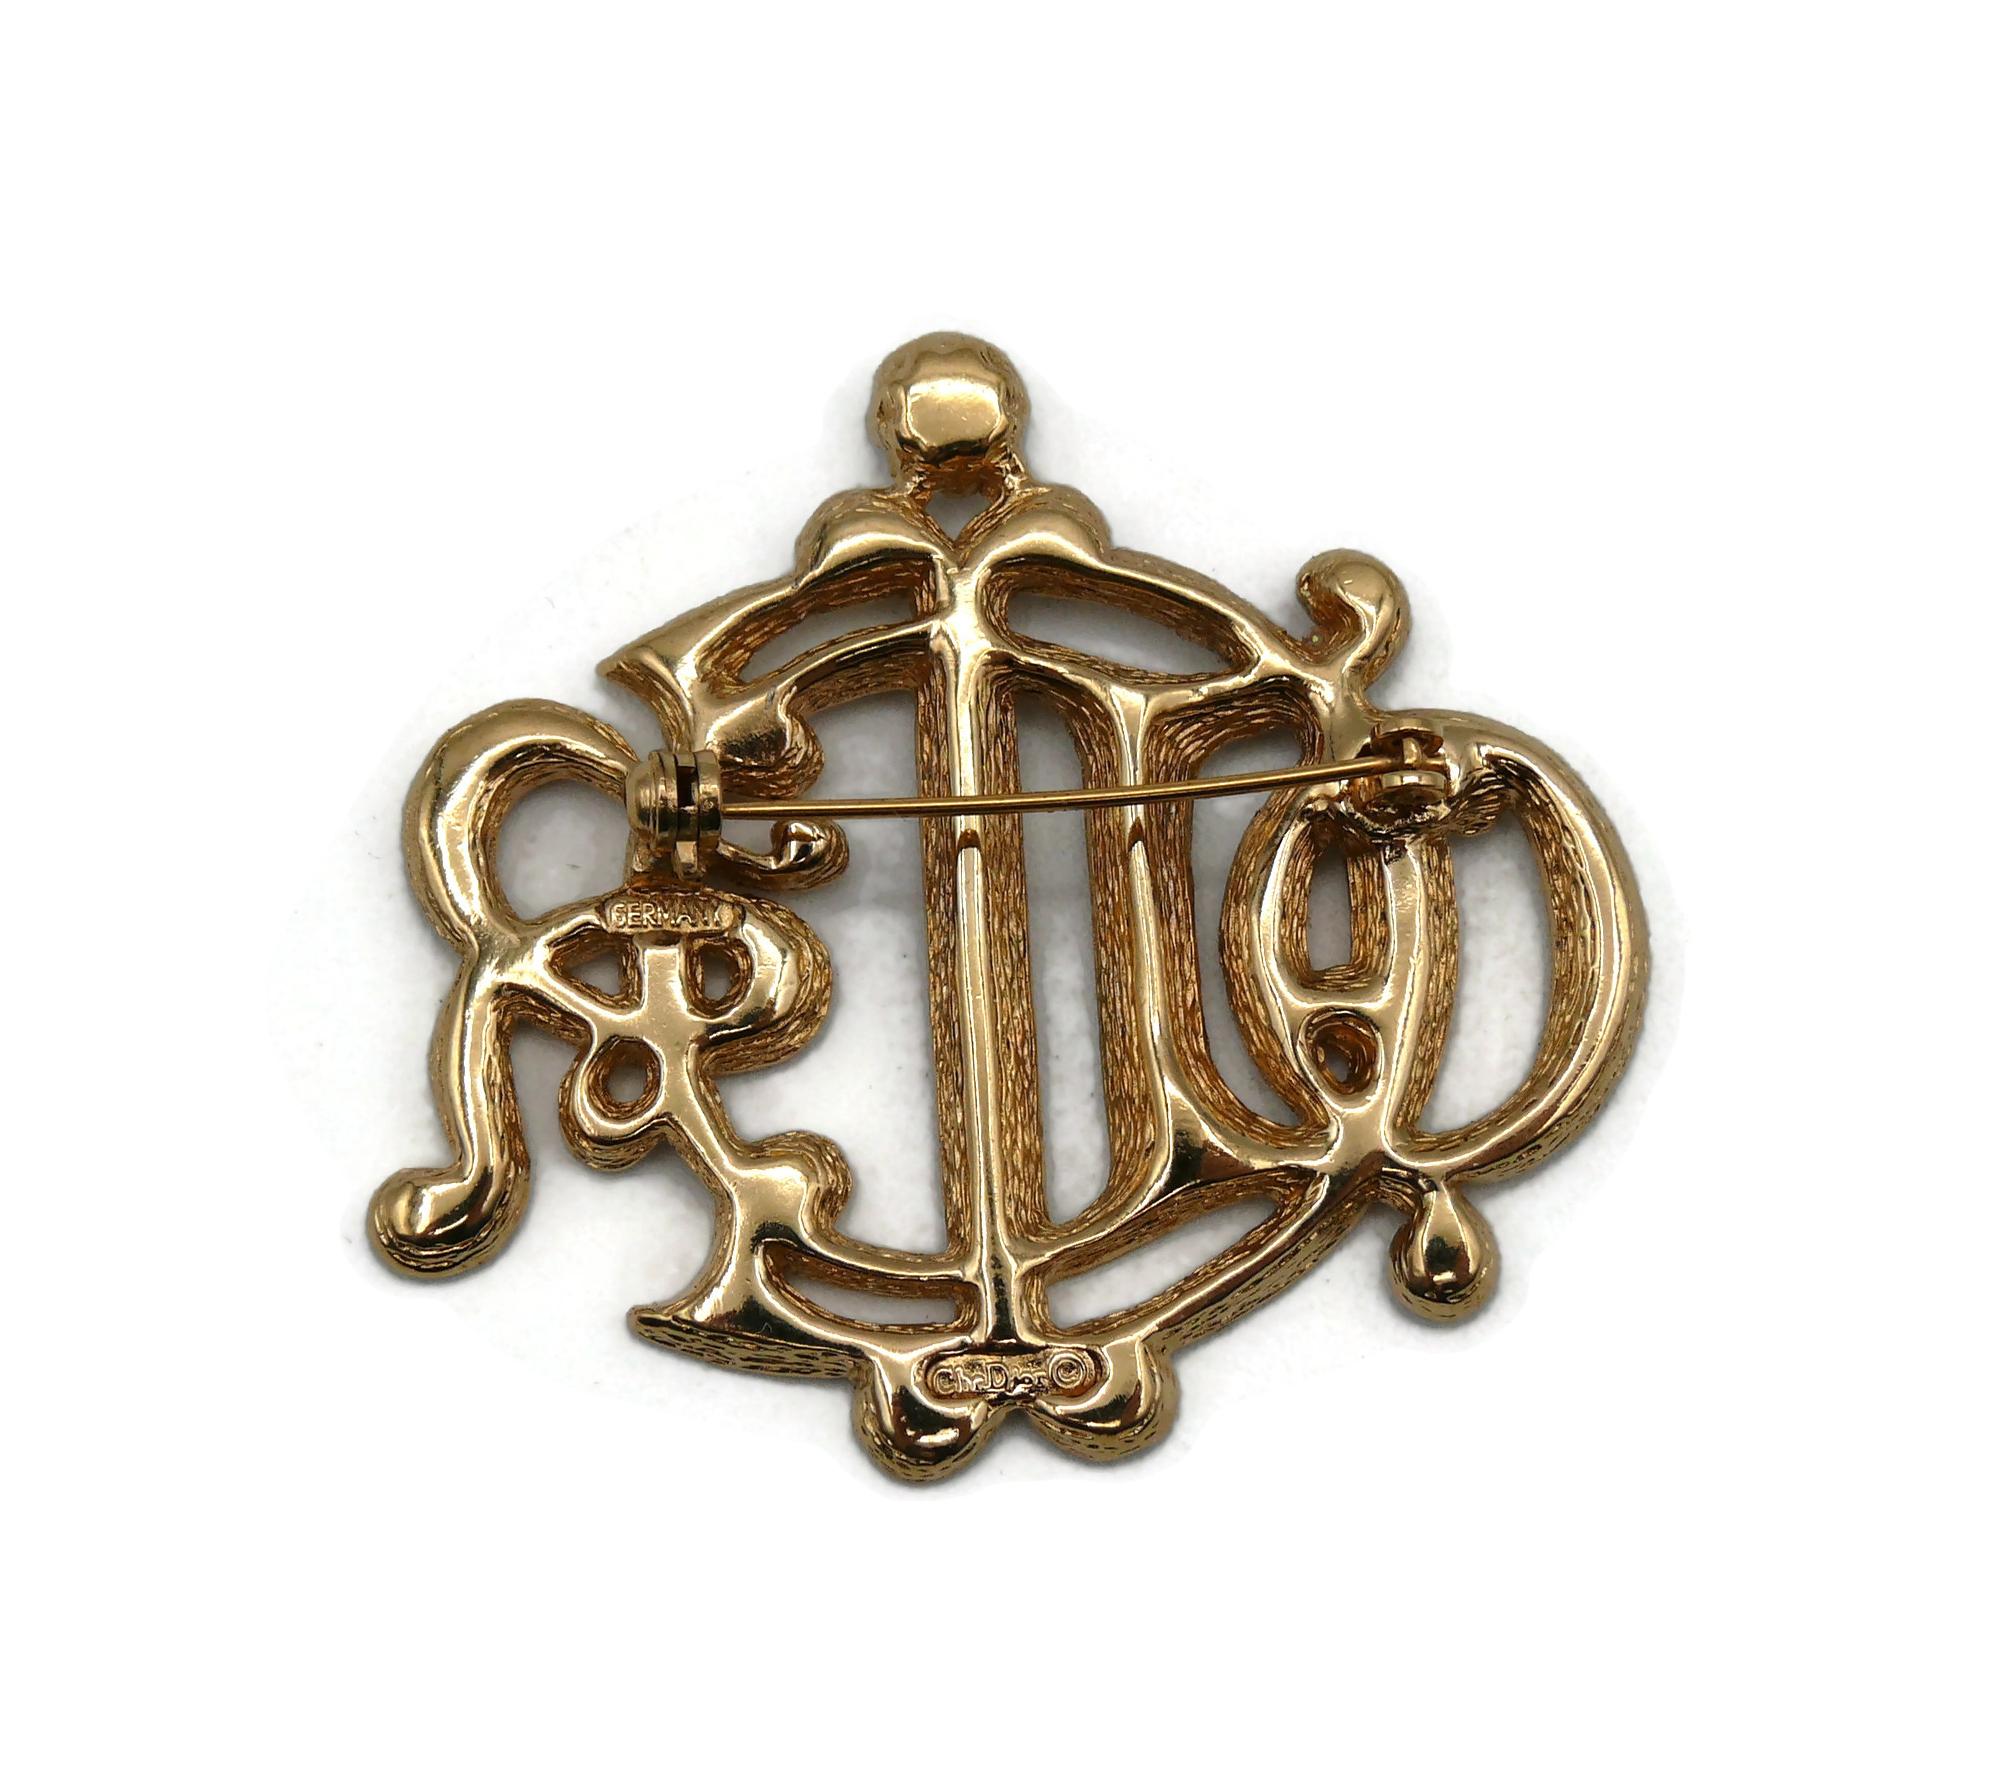 CHRISTIAN DIOR Vintage Jewelled Insigna Monogram Logo Brooch In Excellent Condition For Sale In Nice, FR